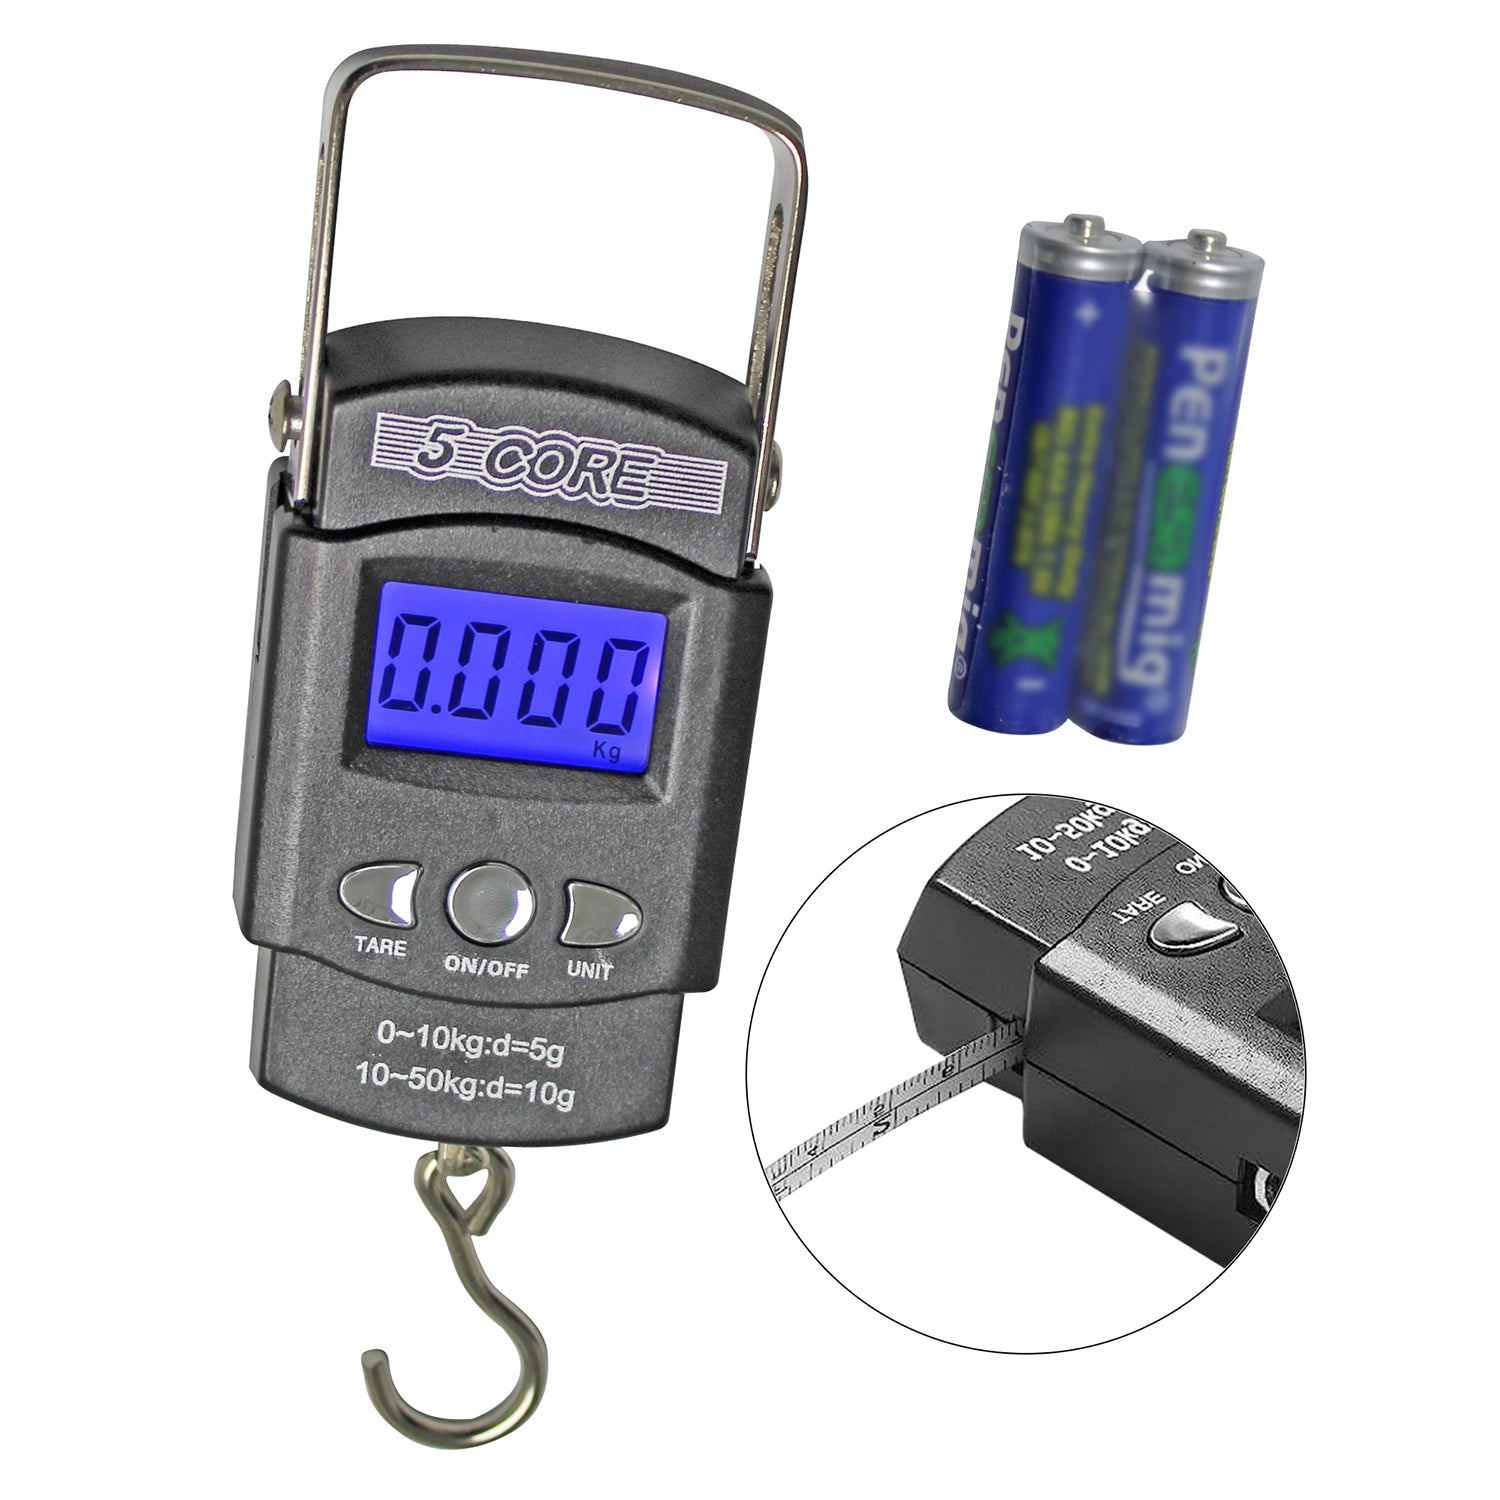 5 Core Fishing Scale 110lb/50kg • Hanging Digital Luggage Weighing Scales w Measuring Tape 1/2 Pc